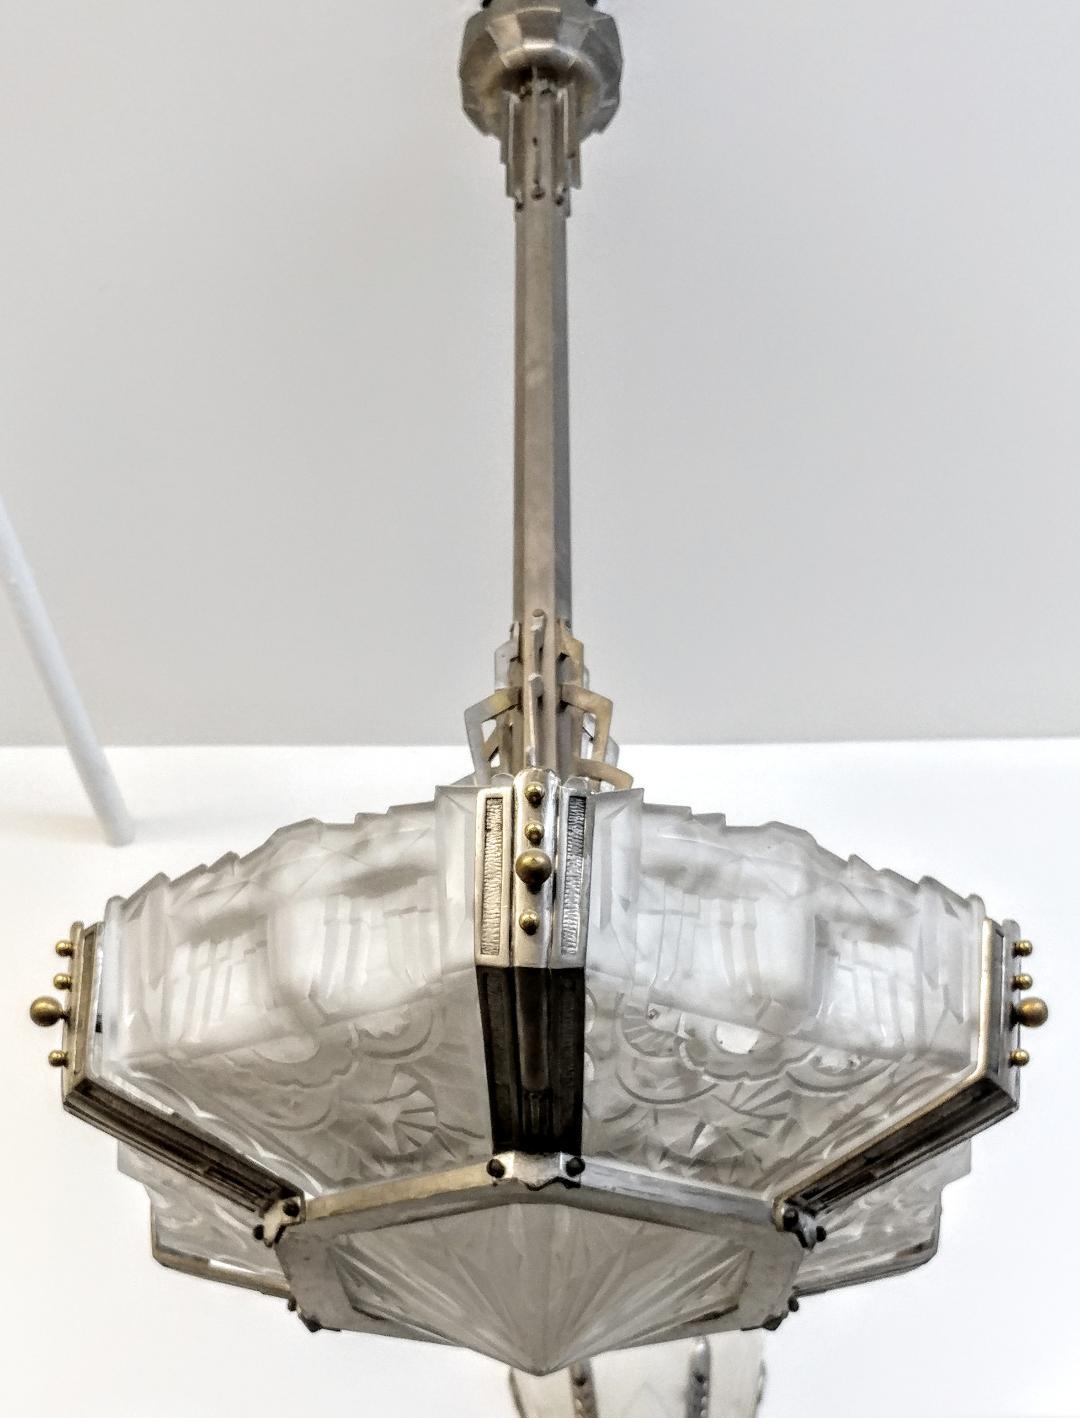 
A gorgeous French Art Deco chandelier by the French artist 